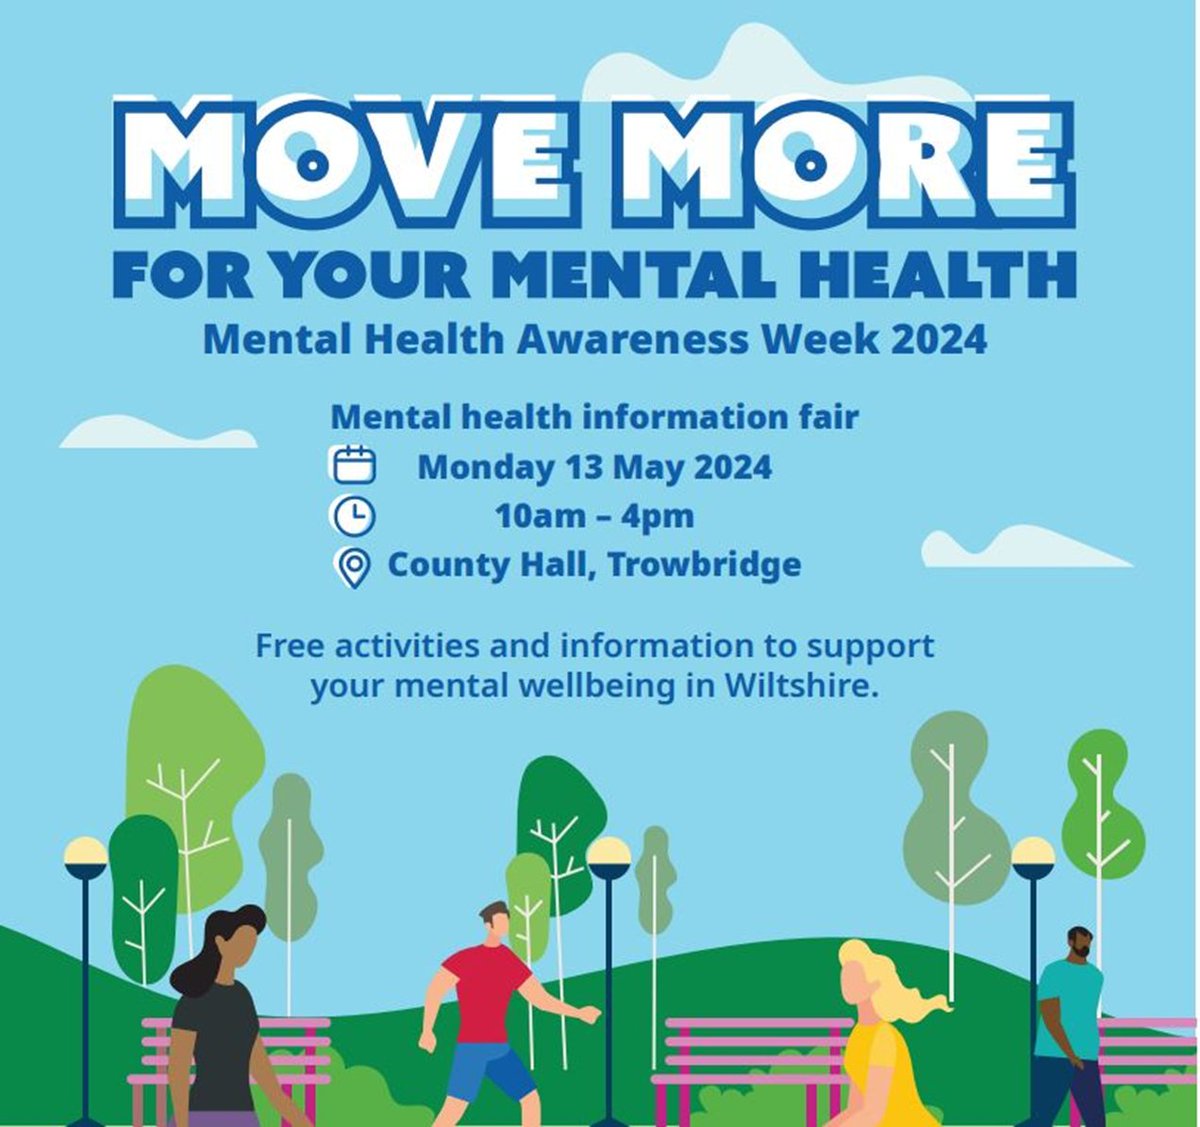 Next week is Mental Health Awareness Week. There will be a free mental health information fair at County Hall in Trowbridge on Monday 13th May, 10am - 4pm, to take part in activities and find out how to improve your mental wellbeing. #MHAW